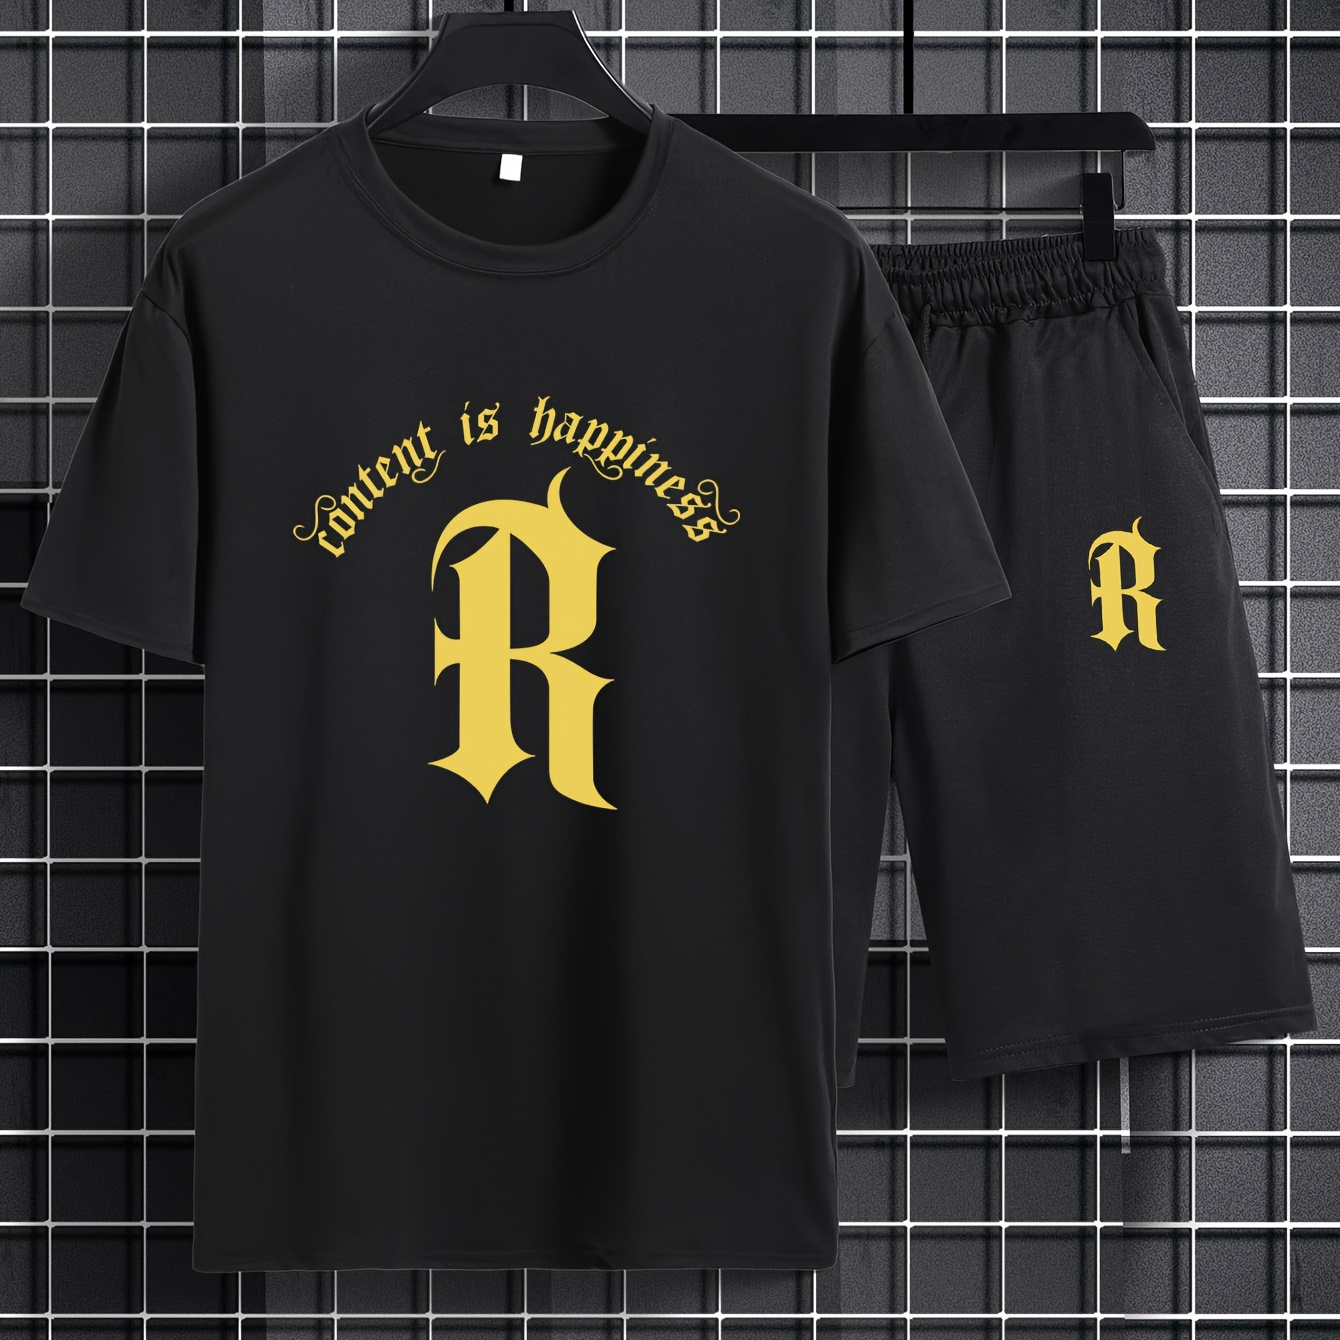 

Letter R Print, Mens 2 Piece Outfits, Comfy Short Sleeve T-shirt And Casual Drawstring Shorts Set For Summer, Men's Clothing